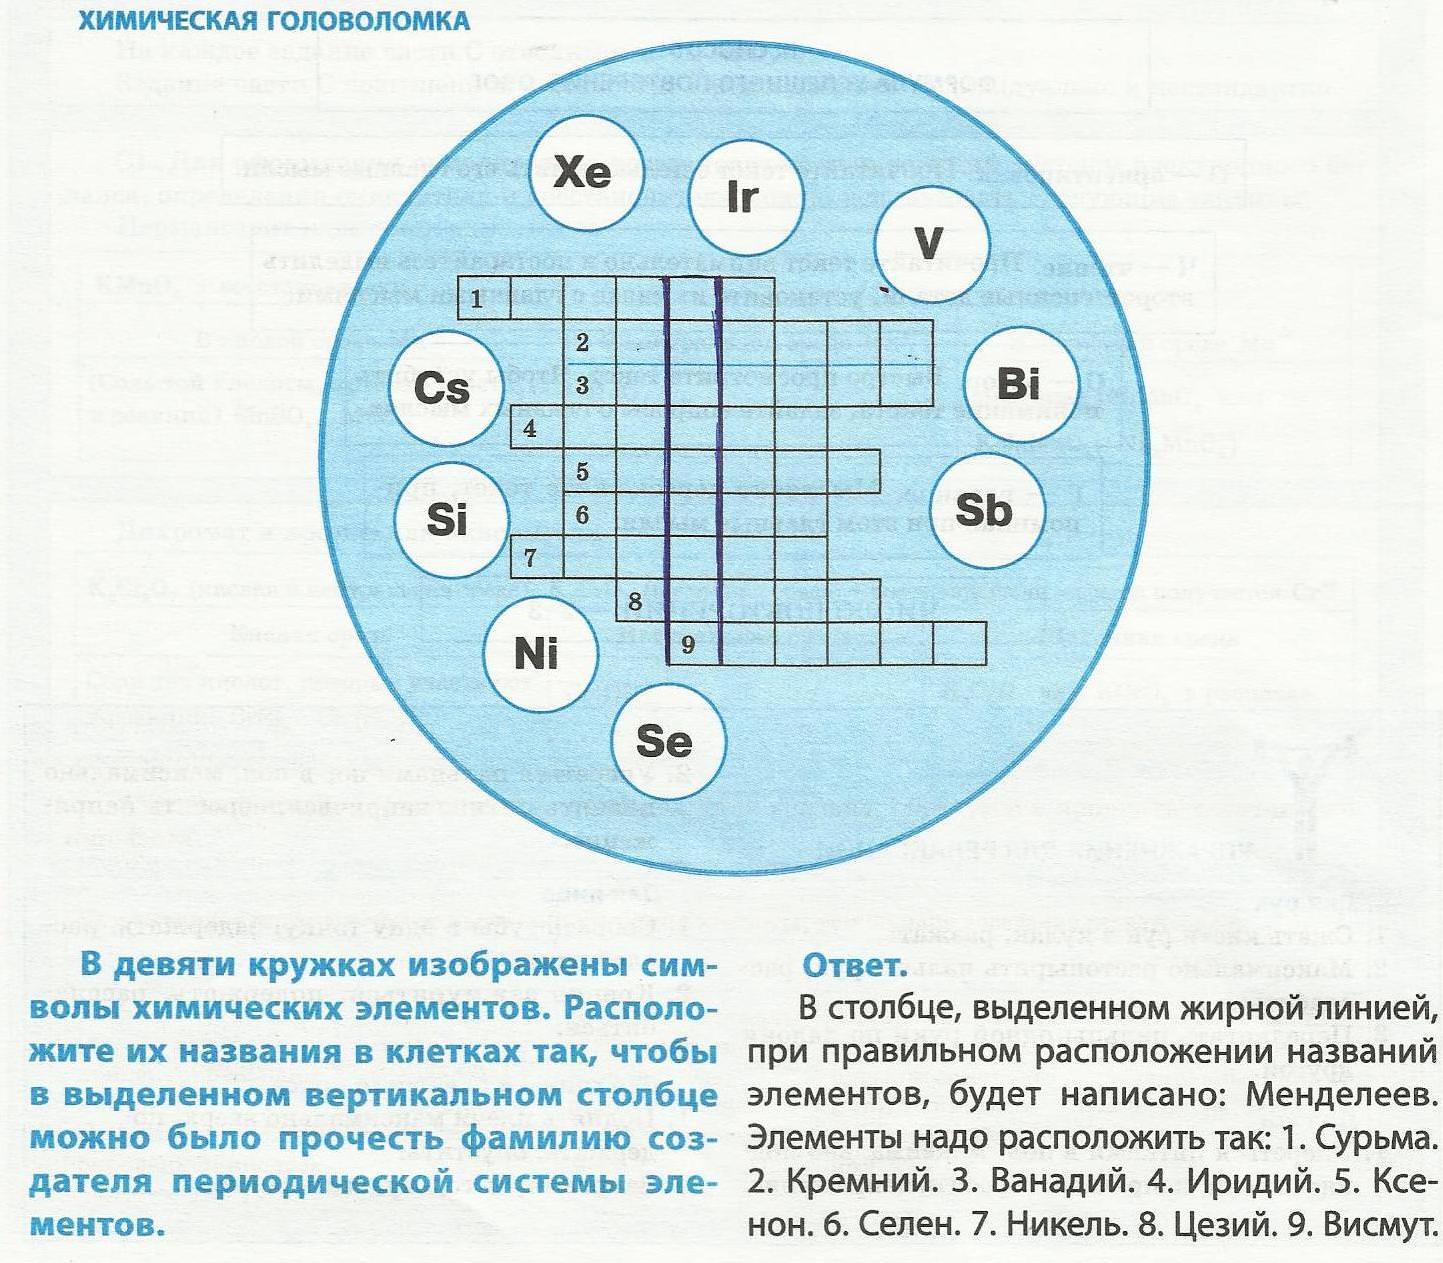 C:Documents and SettingsЛарисаLocal SettingsTemporary Internet FilesContent.WordScan1.jpg